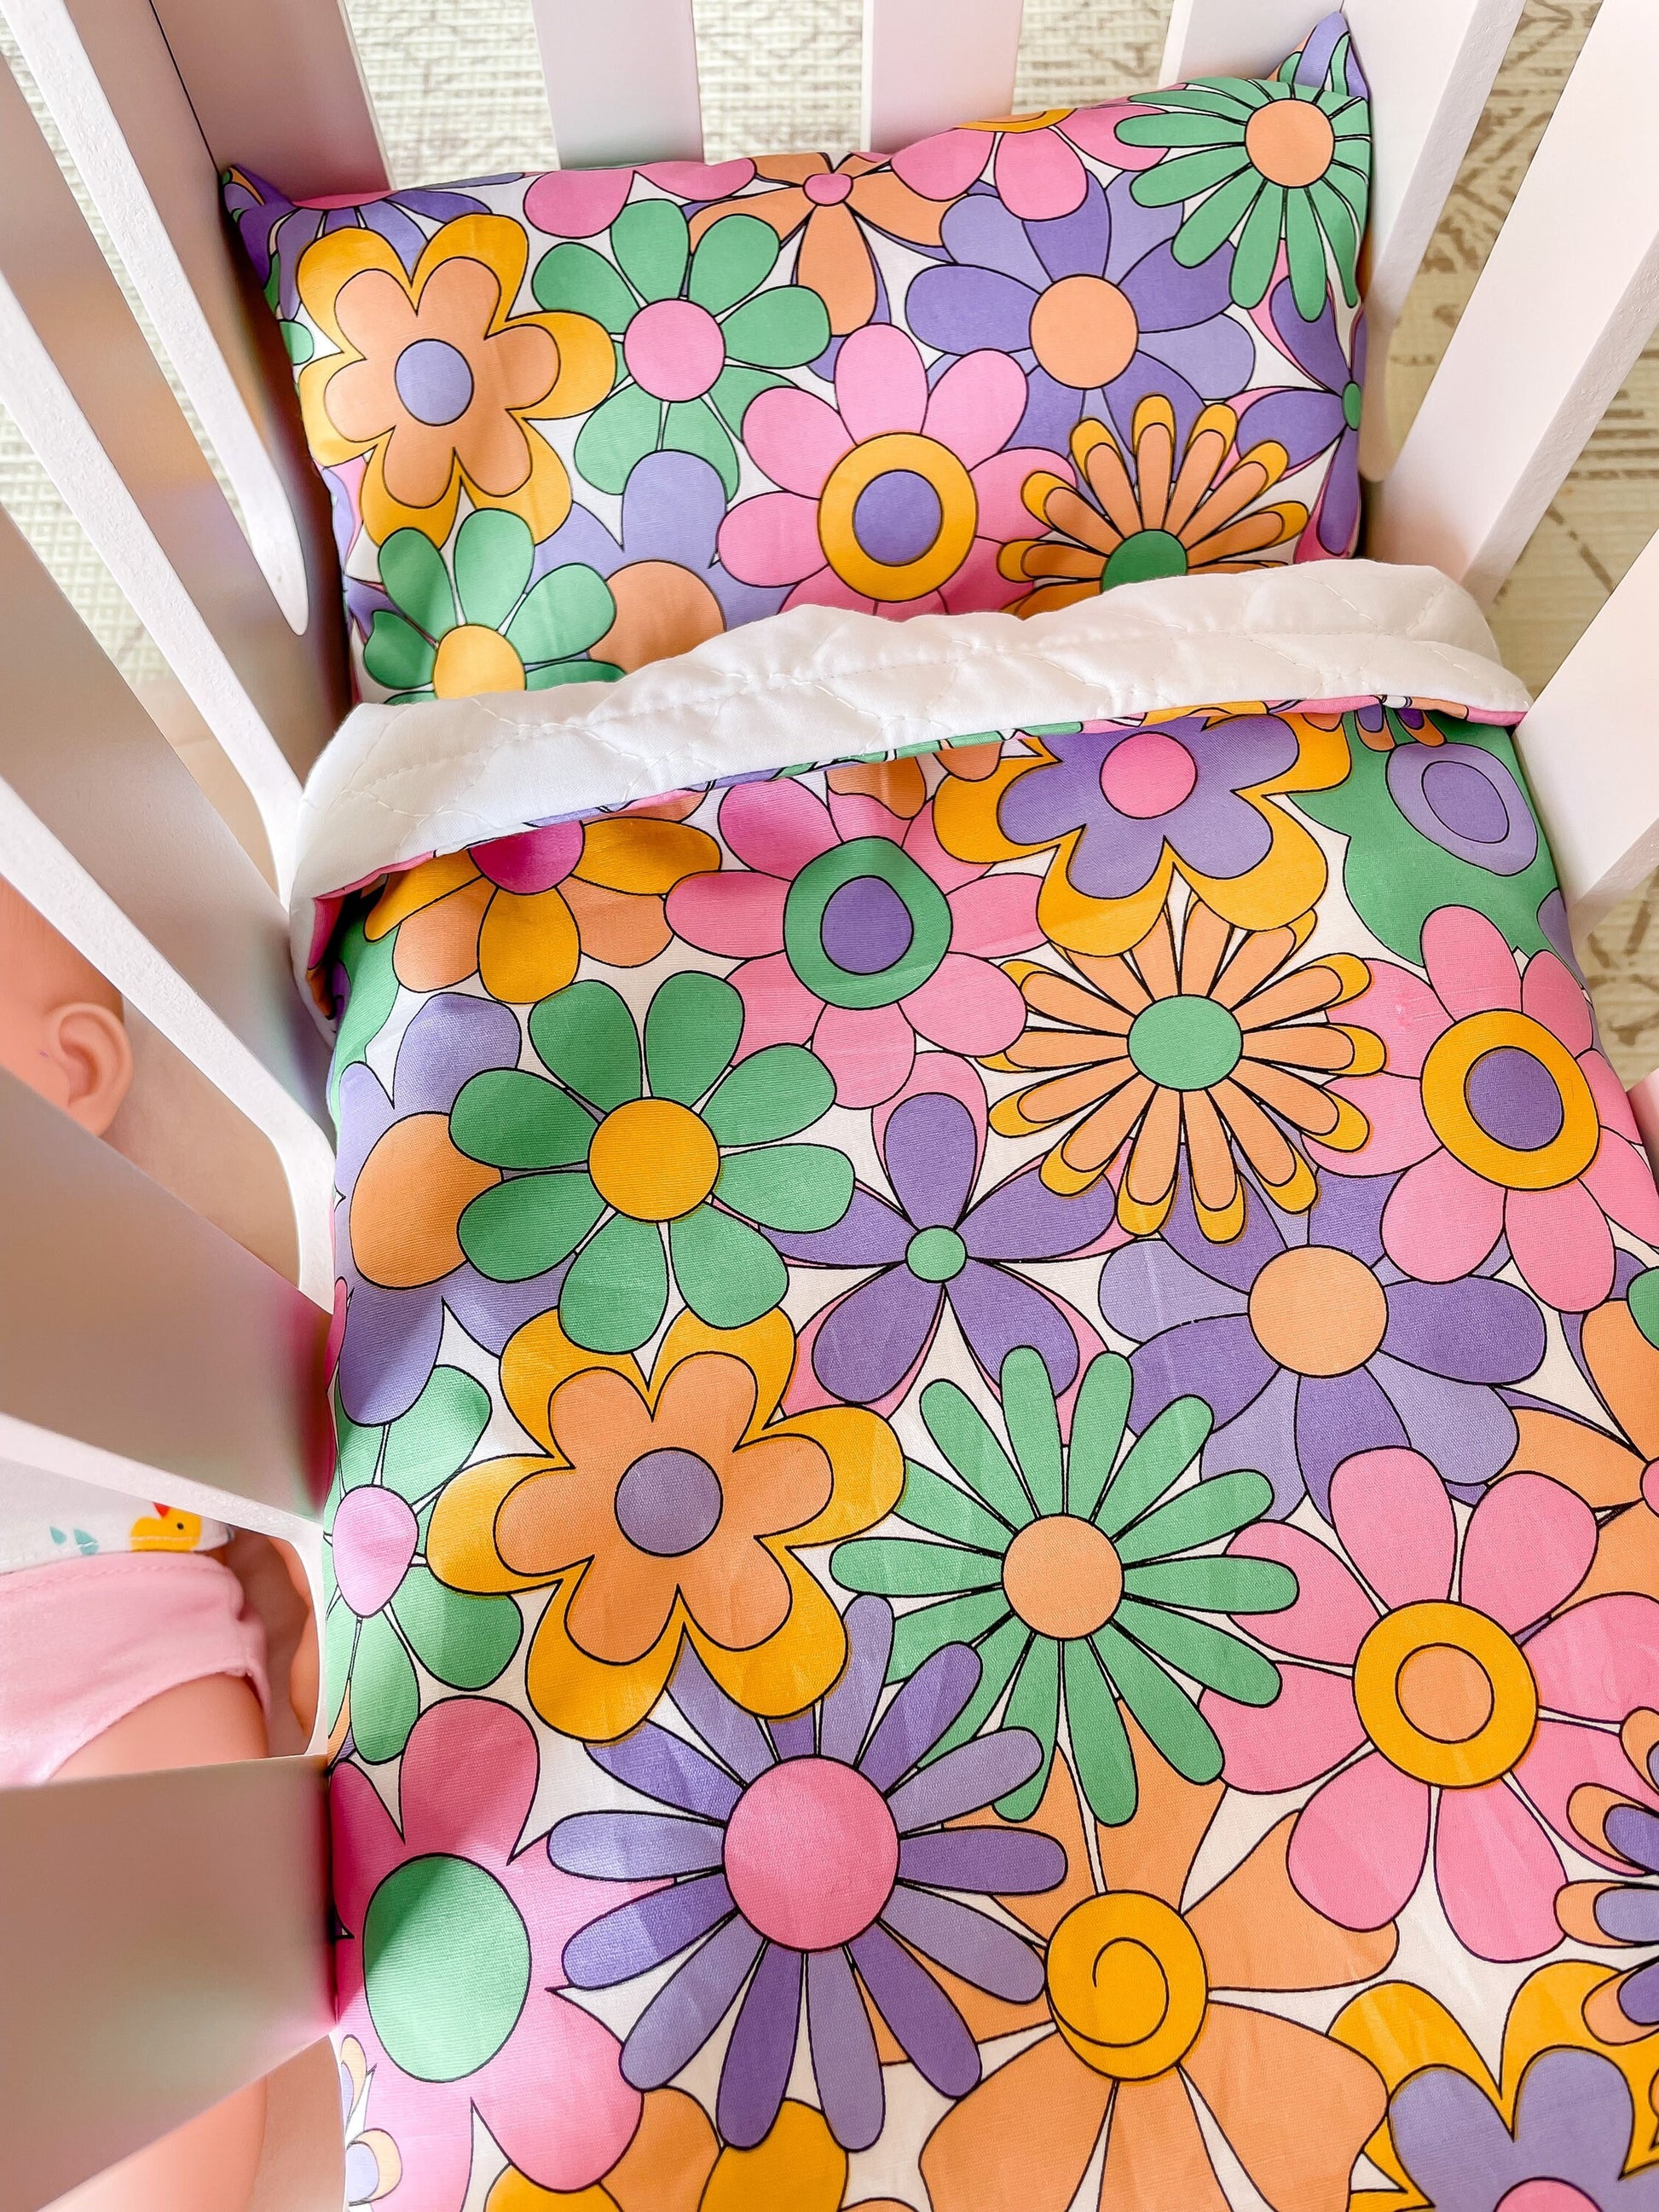 Kmart Doll Bedding | Toy Bedding and Quilt Set | Bedding Kit For Doll | Linen for Doll Bed | Ikea Doll Bed Set | Baby Carriage